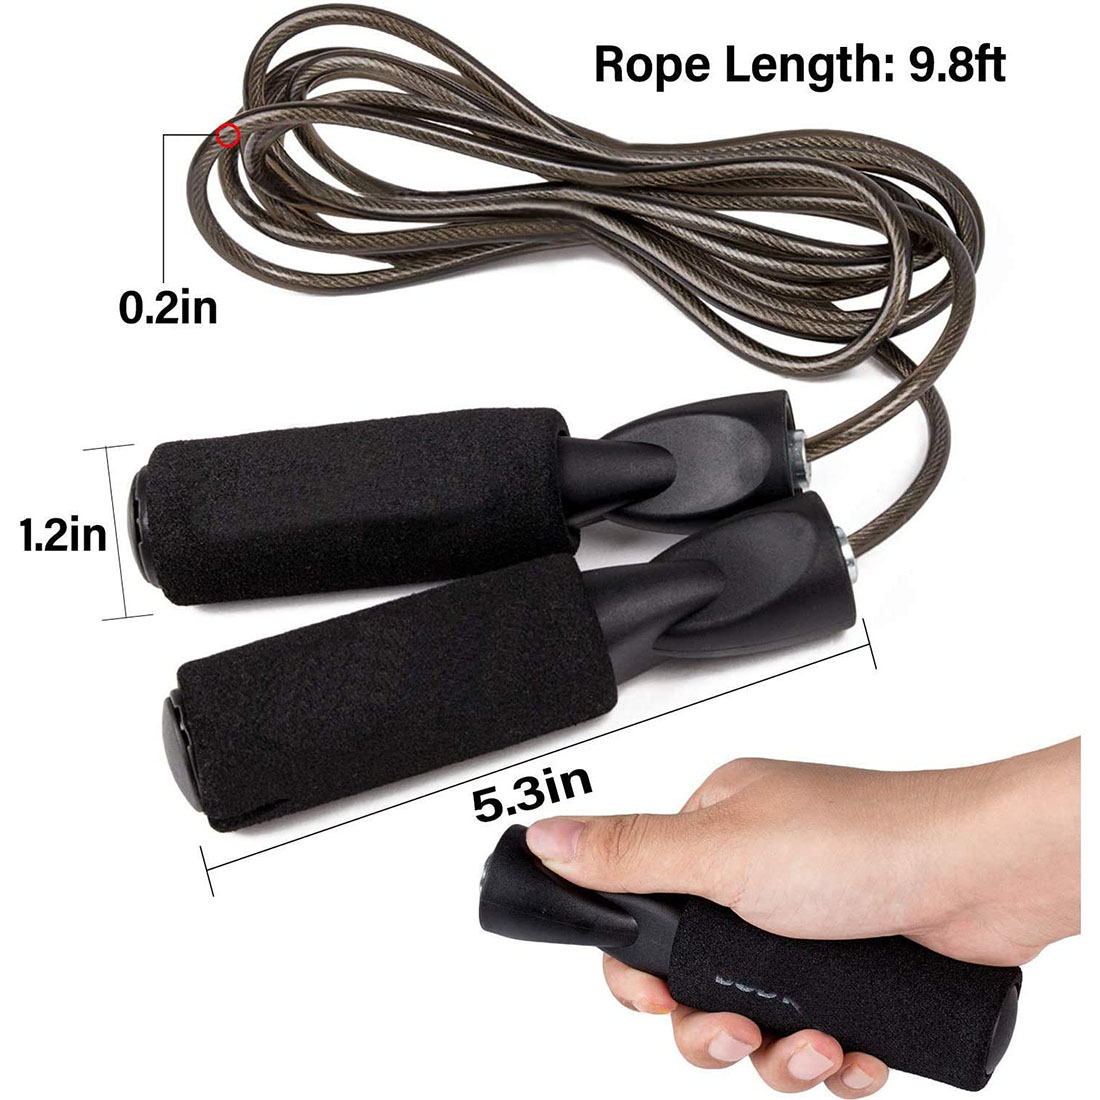 Jump Rope Speed Jumping Steel Wire Double Unders MMA Boxing Skipping Workout Fitness Exercise Training Adjustable Length